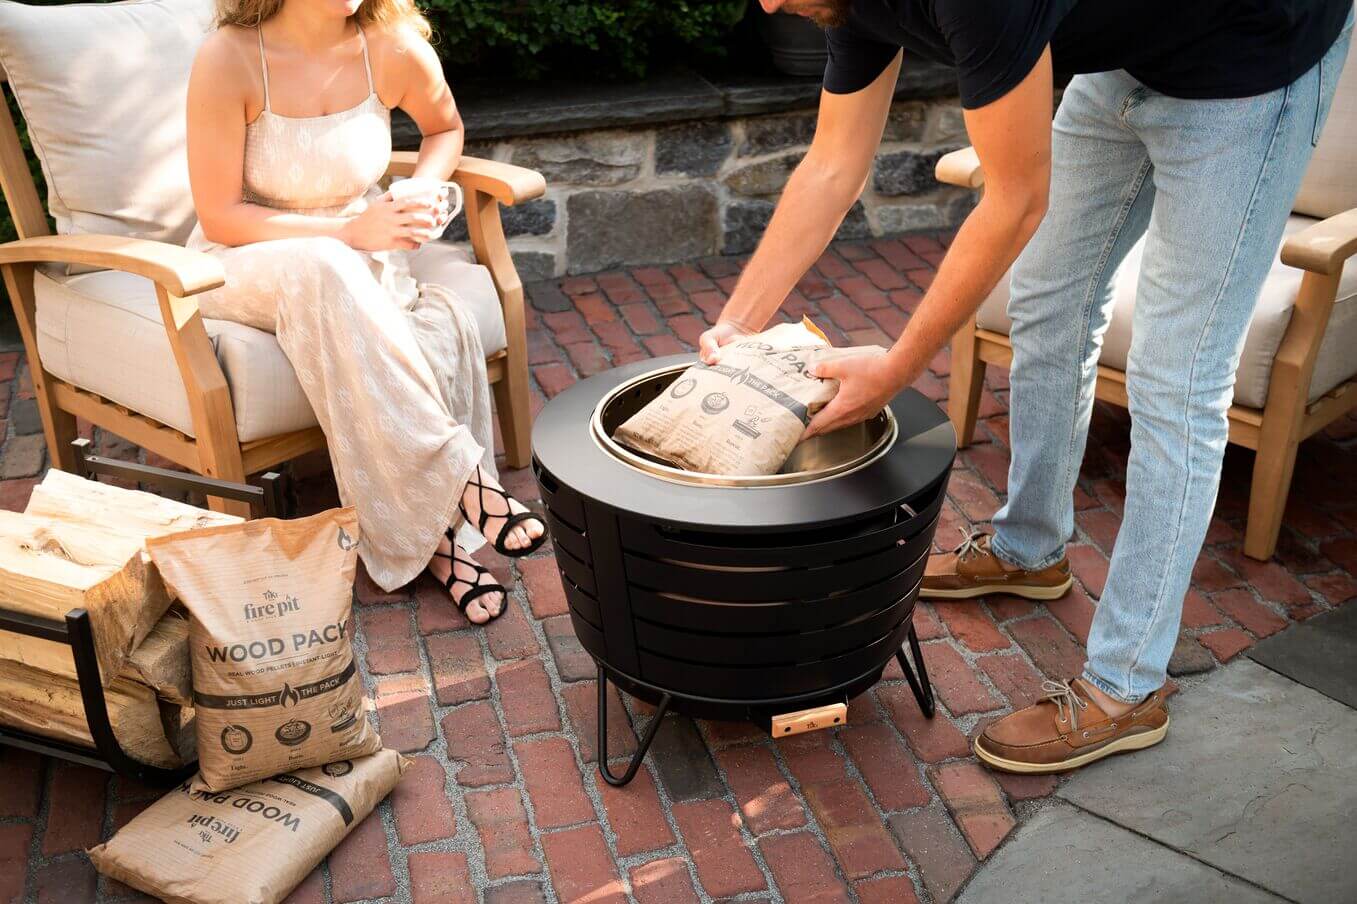 Man placing wood packs in the smokeless fire pit while woman enjoys a cup of coffee